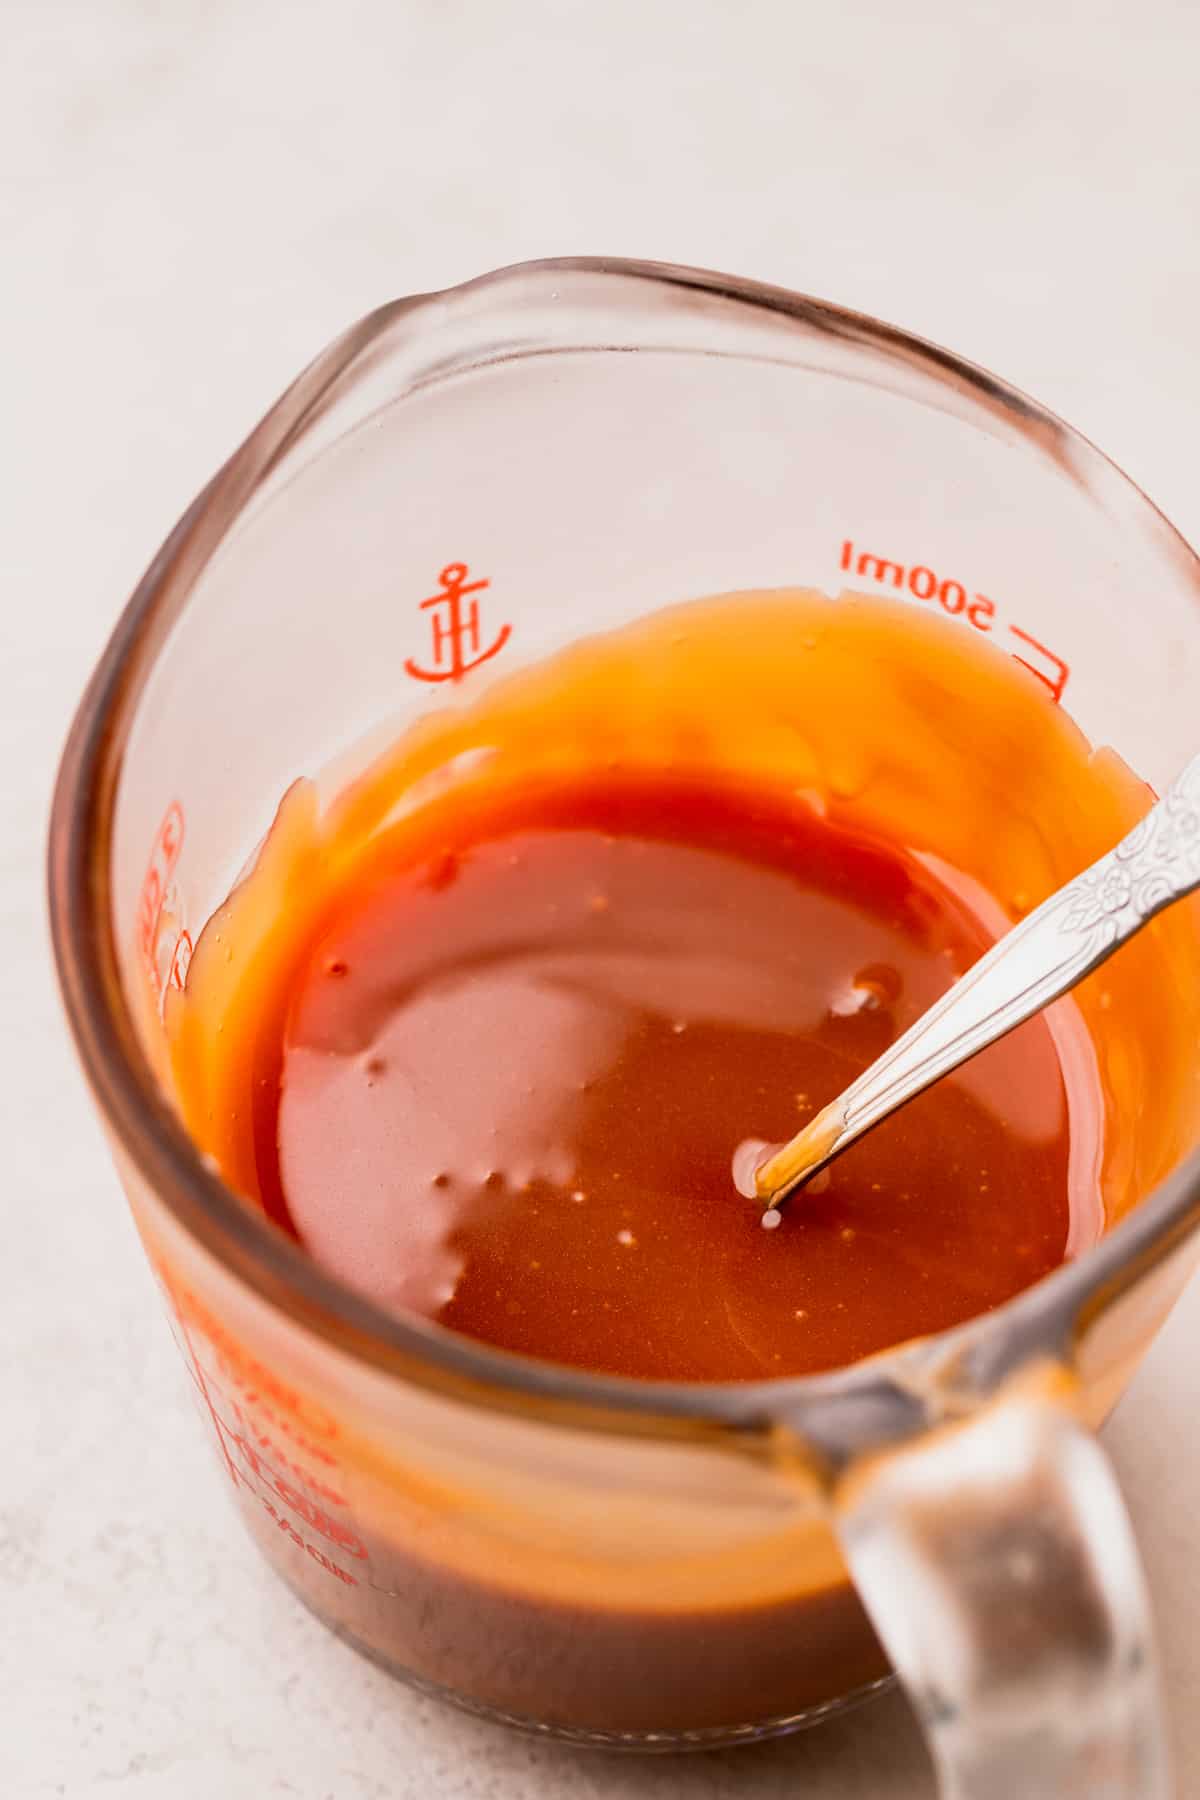 Caramel in a glass measuring cup.